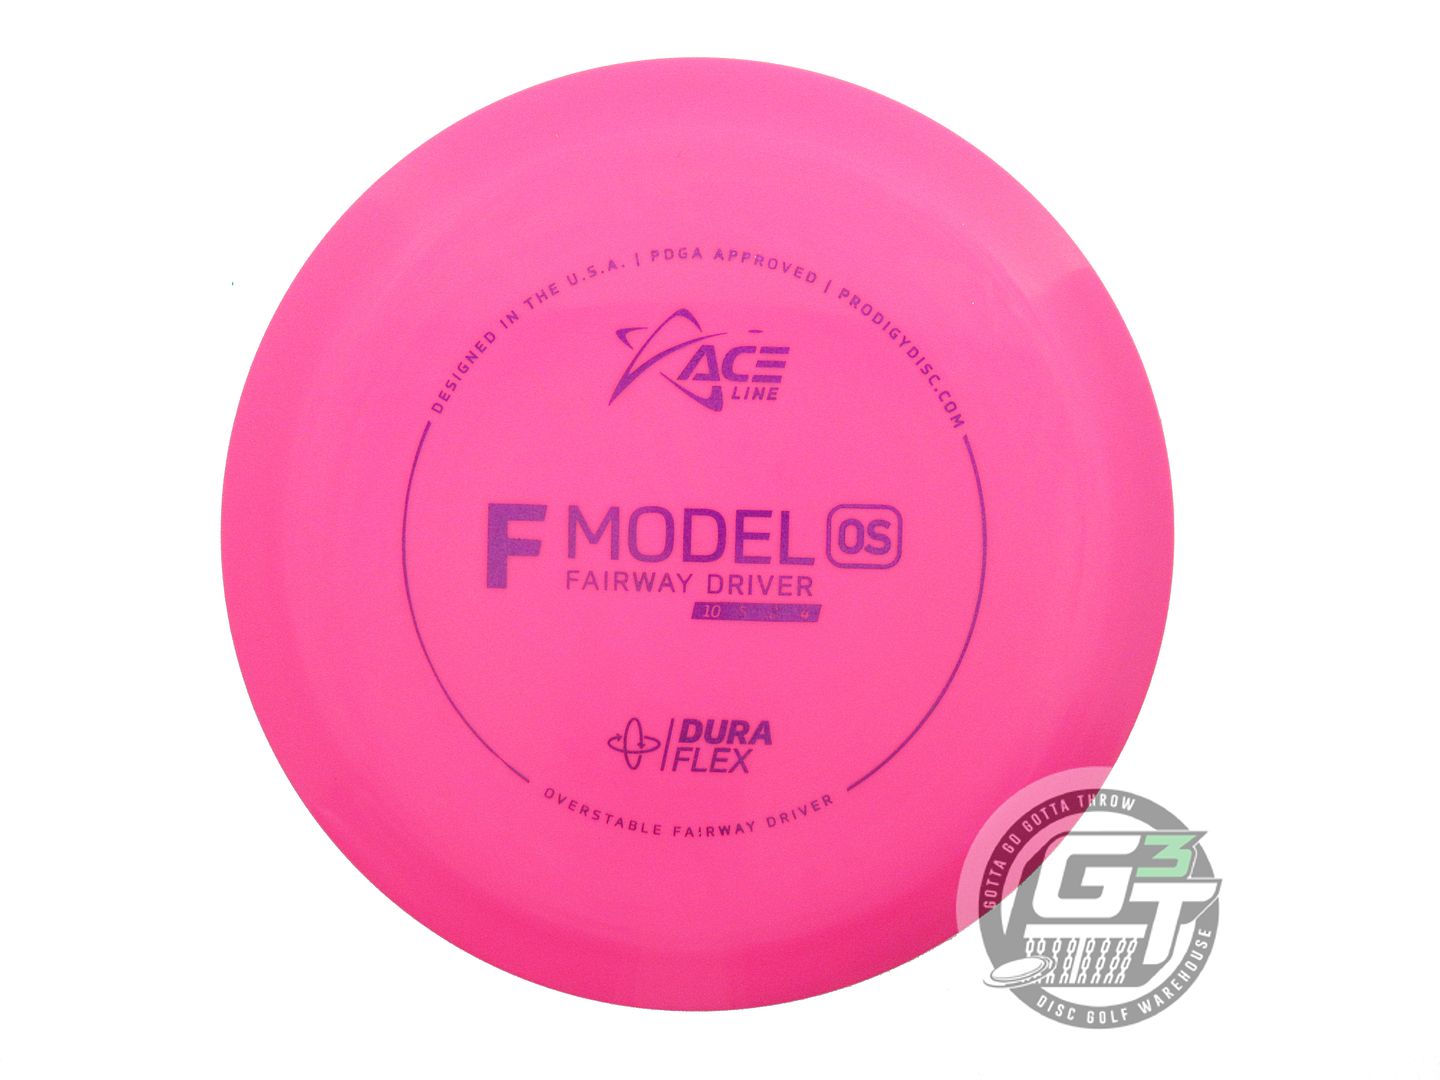 Prodigy Ace Line DuraFlex F Model OS Fairway Driver Golf Disc (Individually Listed)